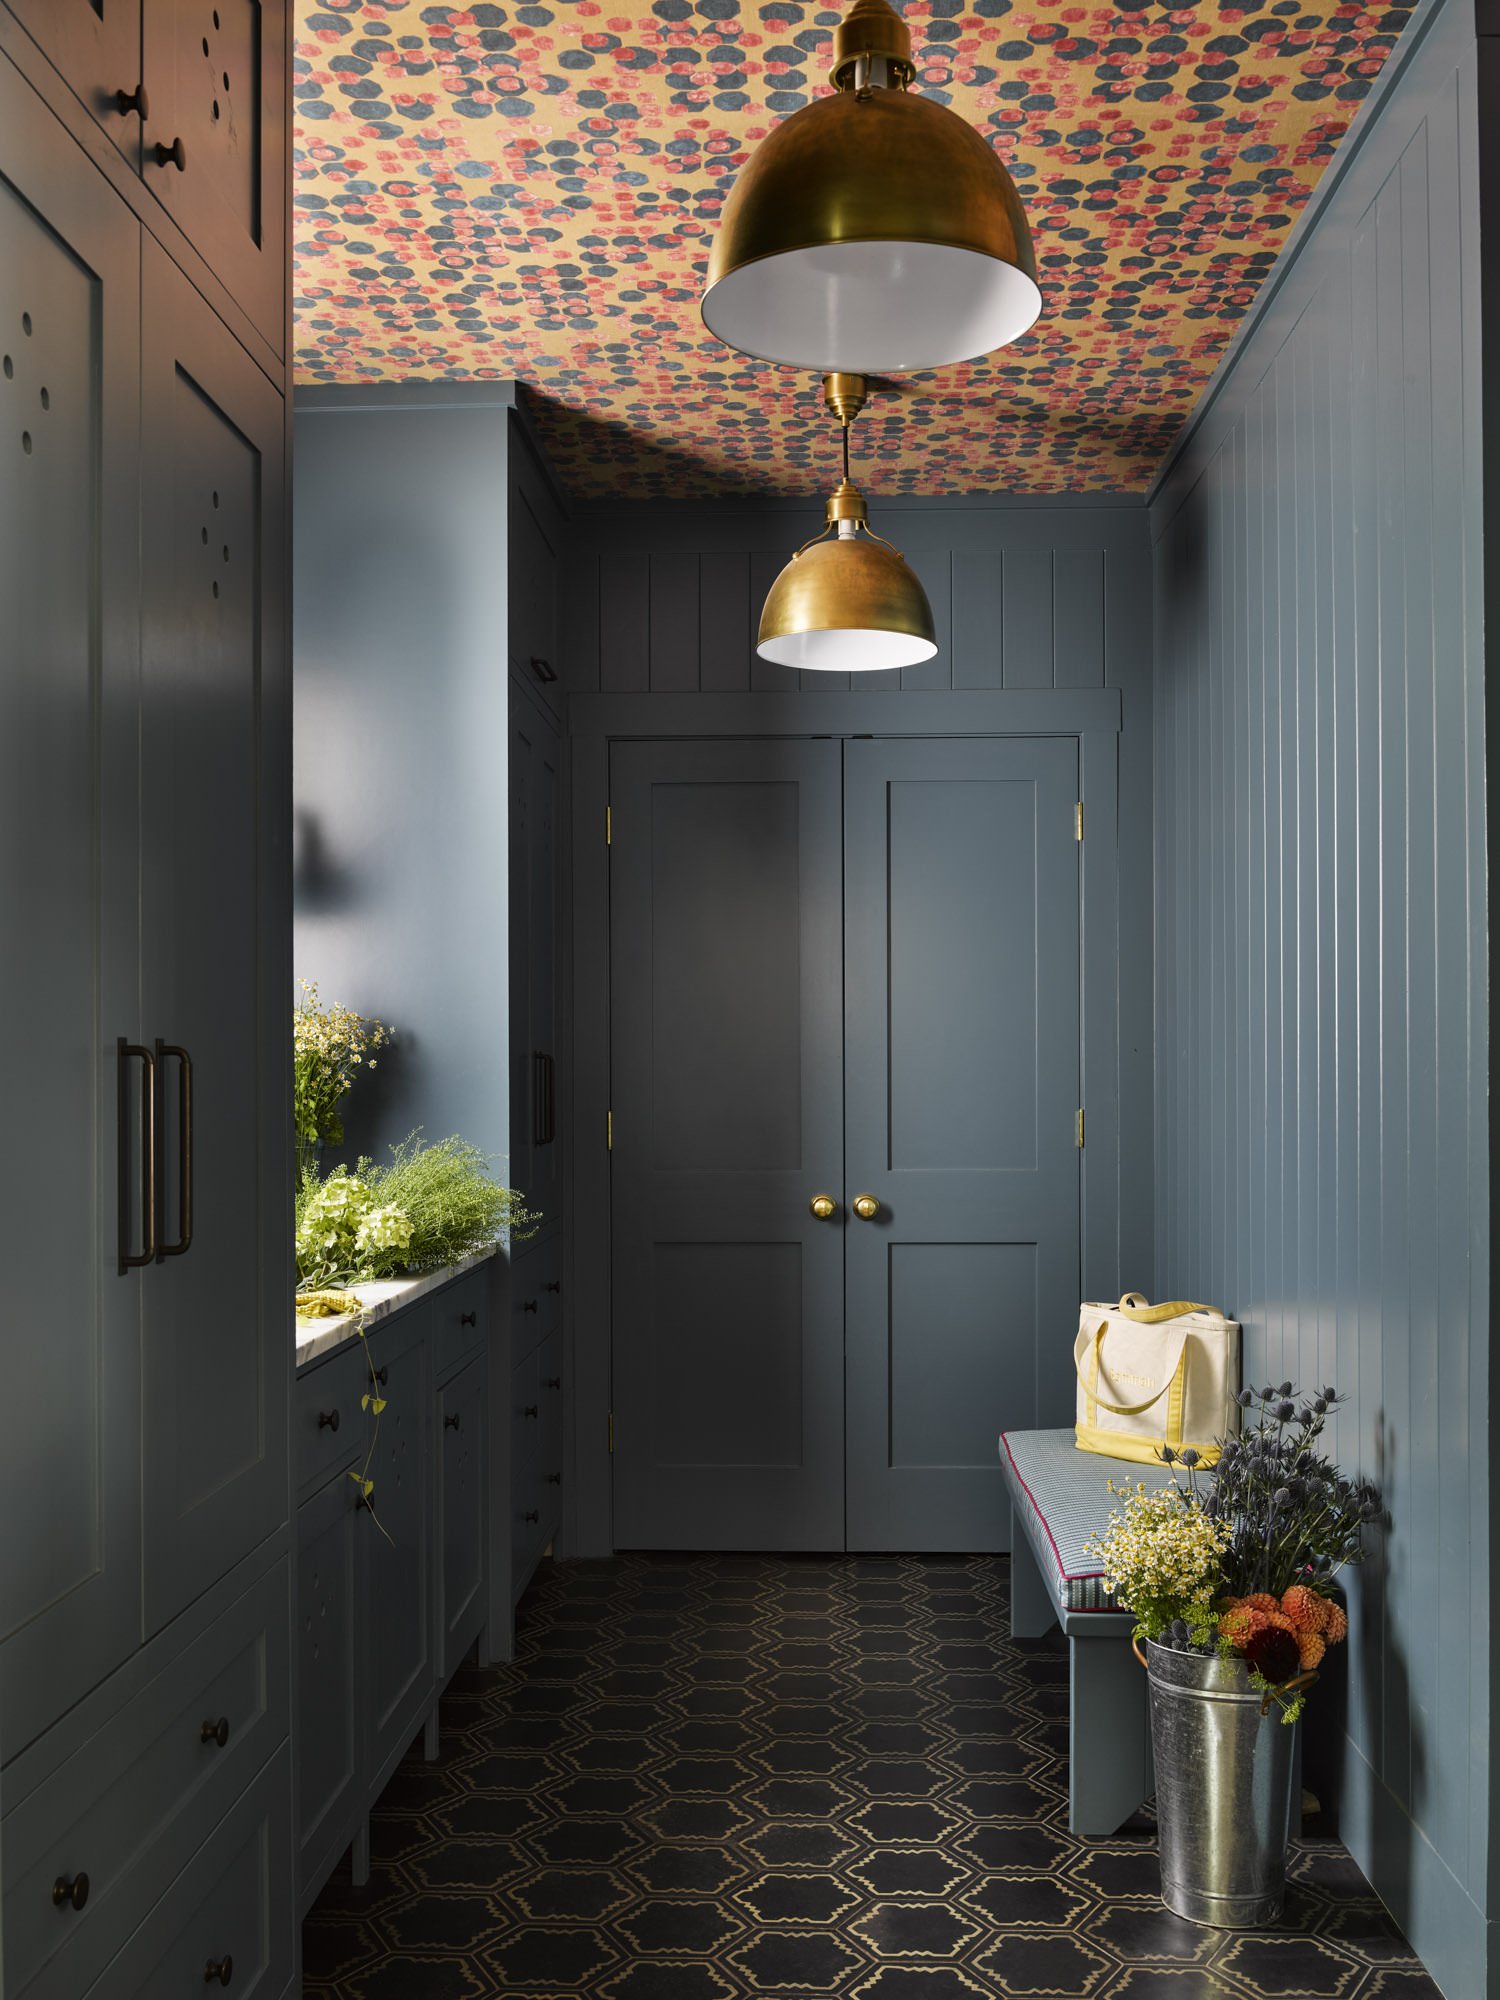   THE MUDROOM FEATURES PATTERNED CEMENT TILES FROM MOSAIC HOUSE, CABINETS PAINTED BENJAMIN MOORE BELLA BLUE 720, BURNISHED BRASS PENDANT LIGHTS FROM VISUAL COMFORT, AND WALLPAPER ON THE CEILING FROM LEE JOFA.  